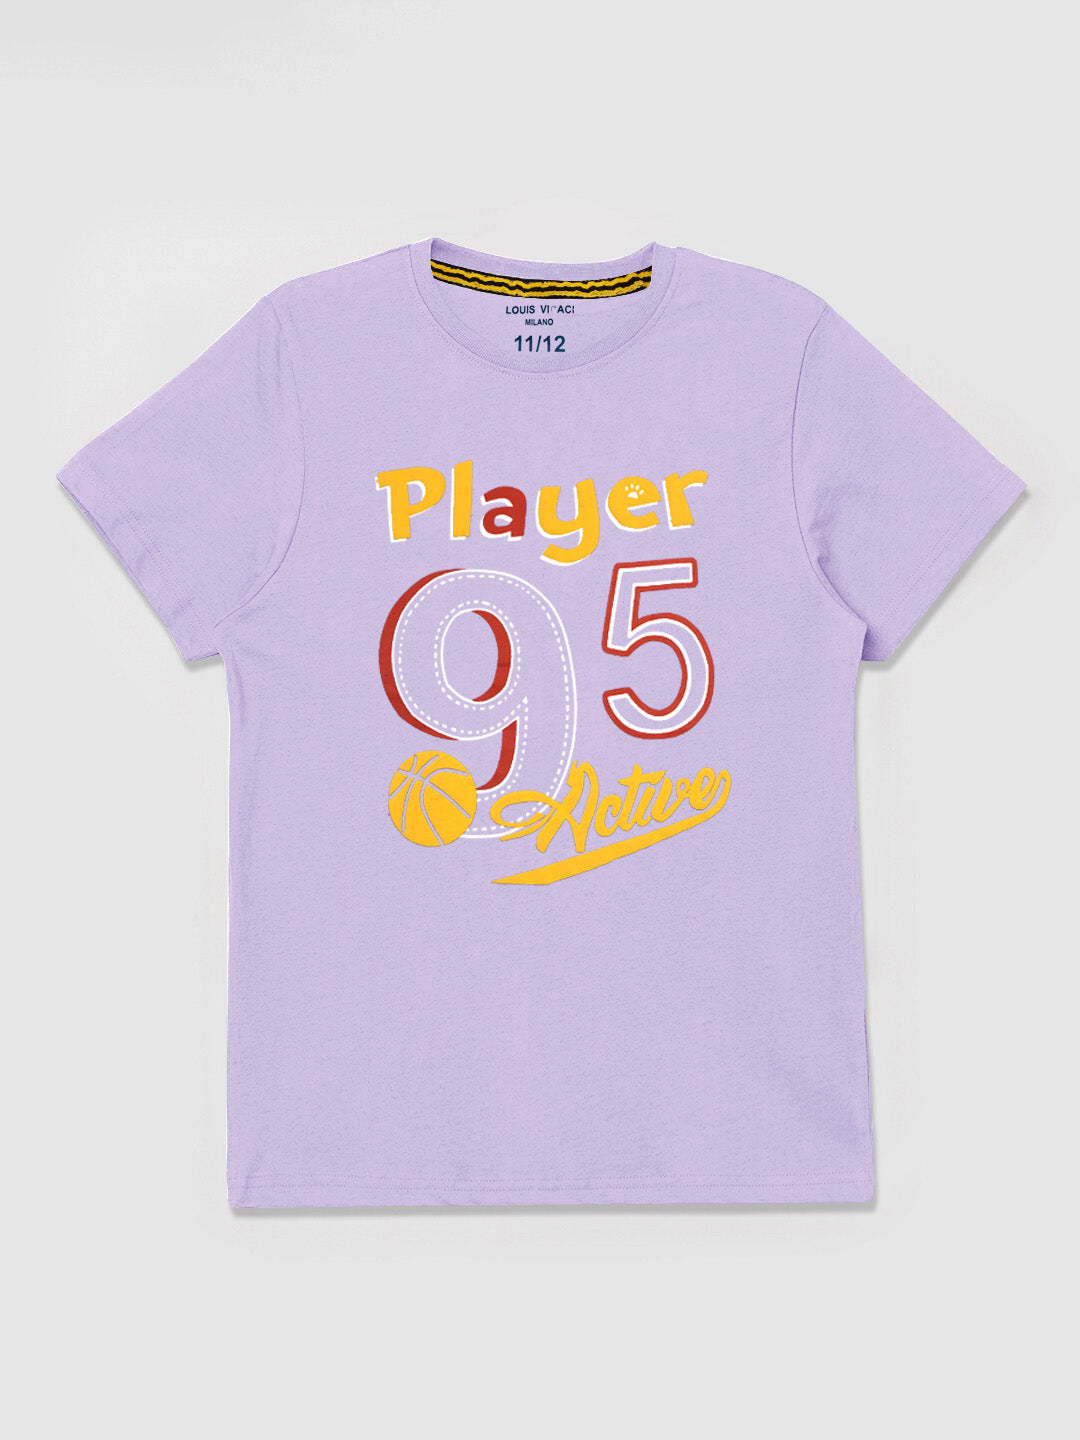 Summer Single Jersey Crew Neck Tee Shirt For Kids-Purple With Print-AN4158